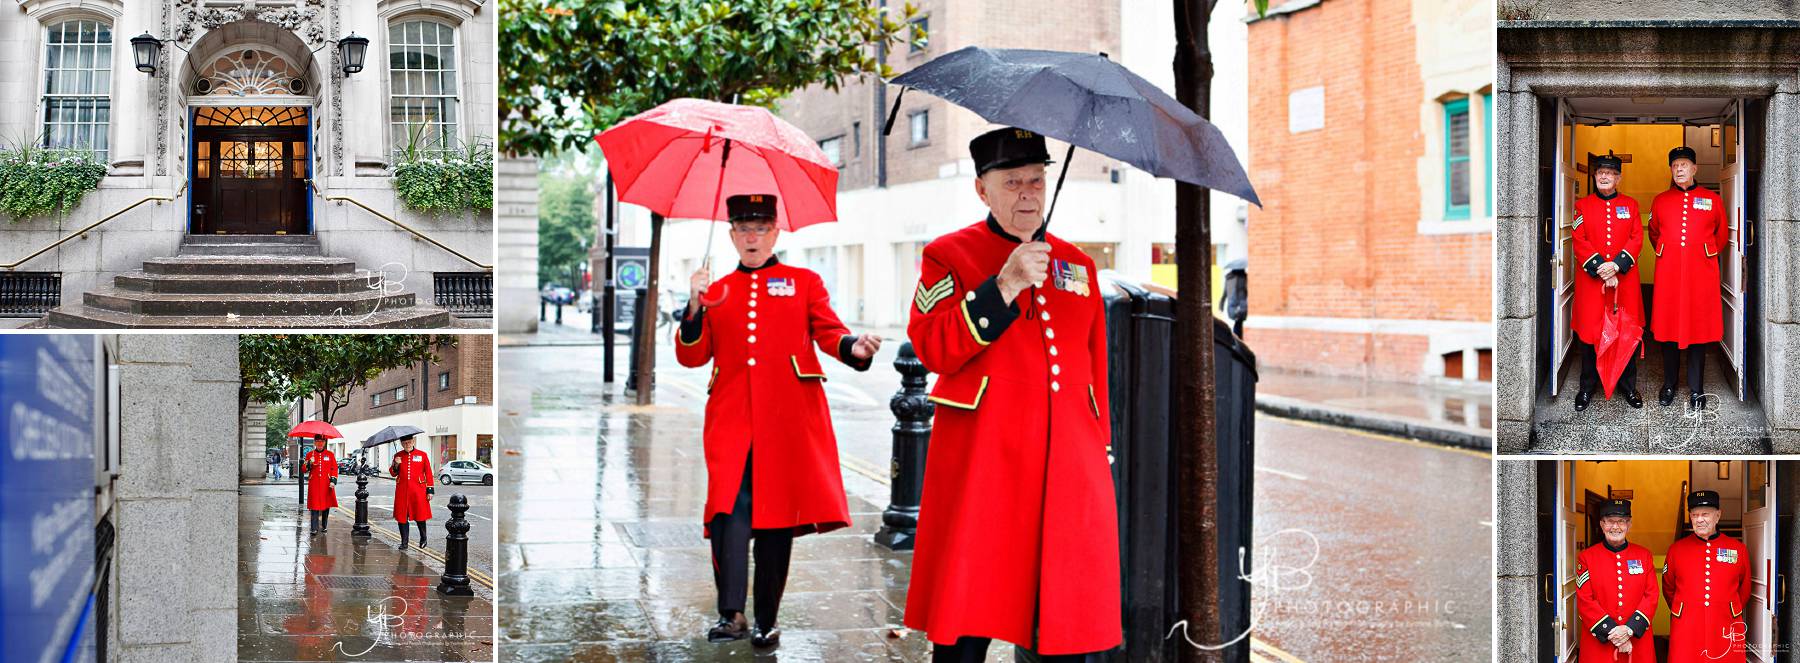 Chelsea Pensioners arrive at Chelsea Register Office to be witnesses.